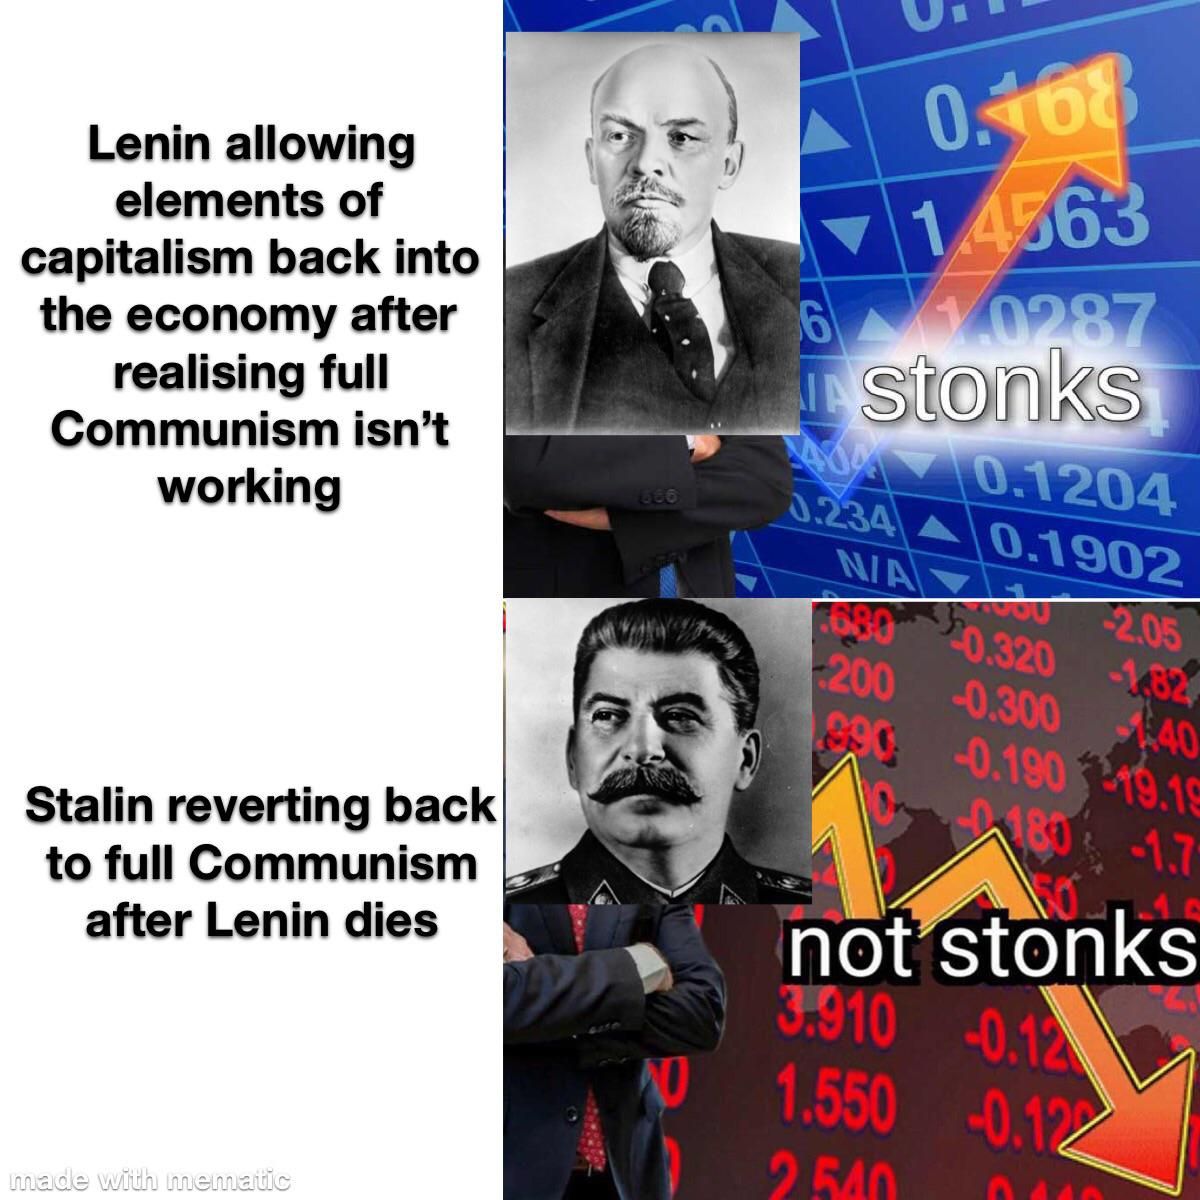 Lenin’s New Economic Policy was going well until Stalin